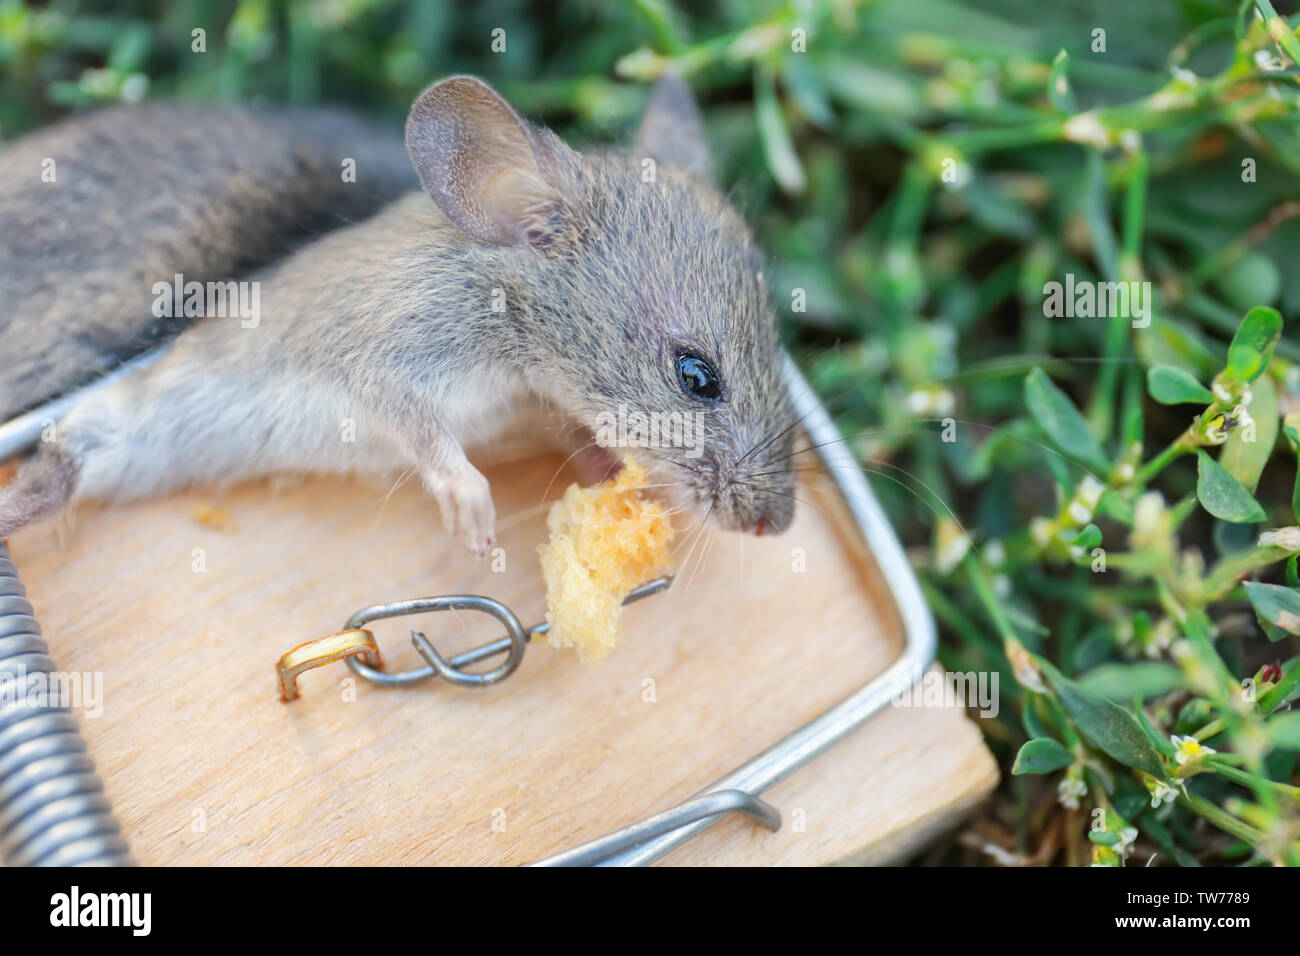 https://c8.alamy.com/comp/TW7789/dead-mouse-caught-in-trap-outdoors-TW7789.jpg